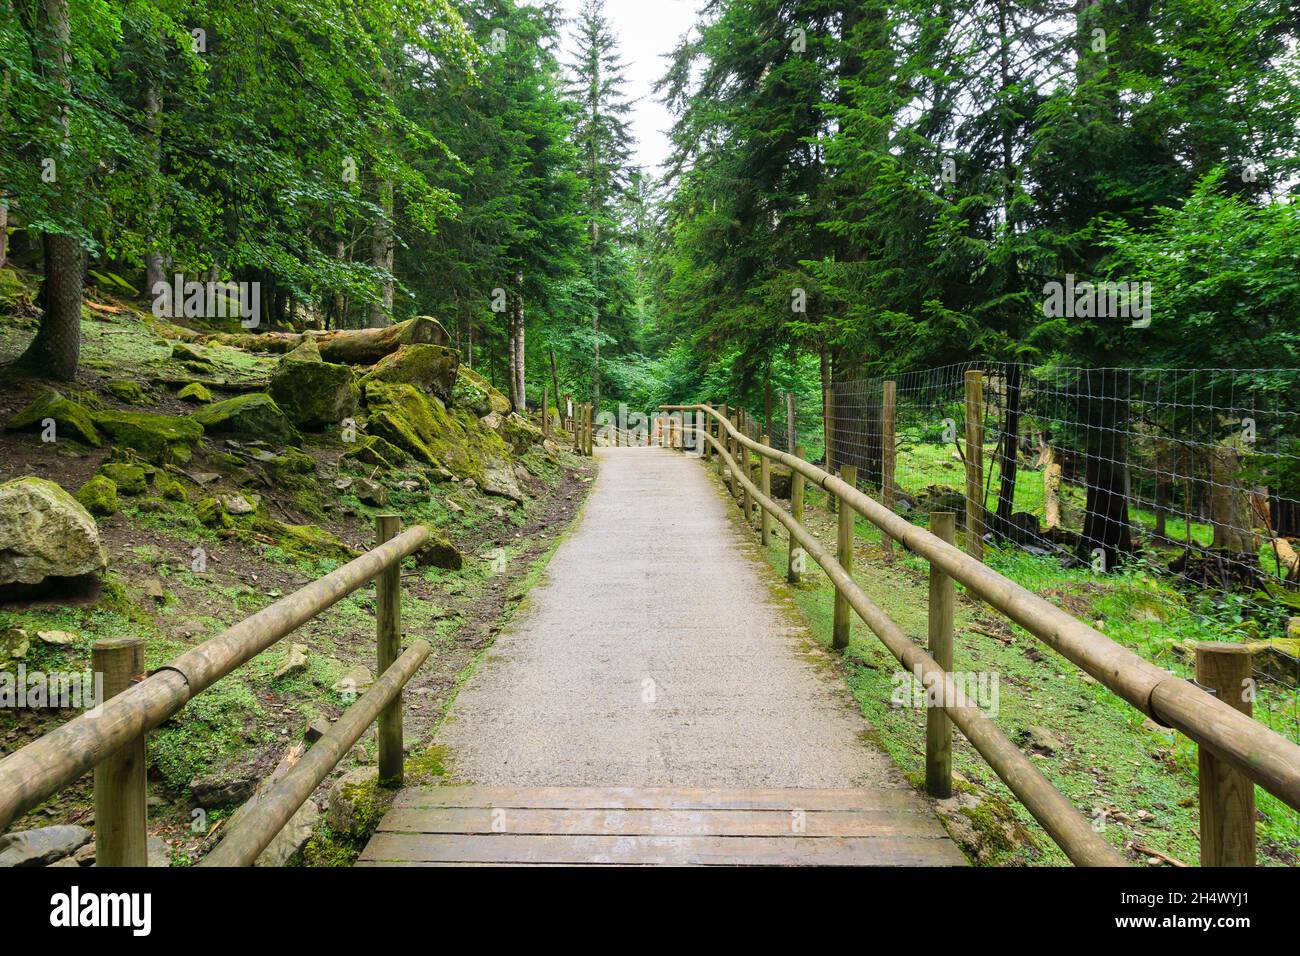 Path in a forest with a wooden railing and protective fences for wild animals Stock Photo